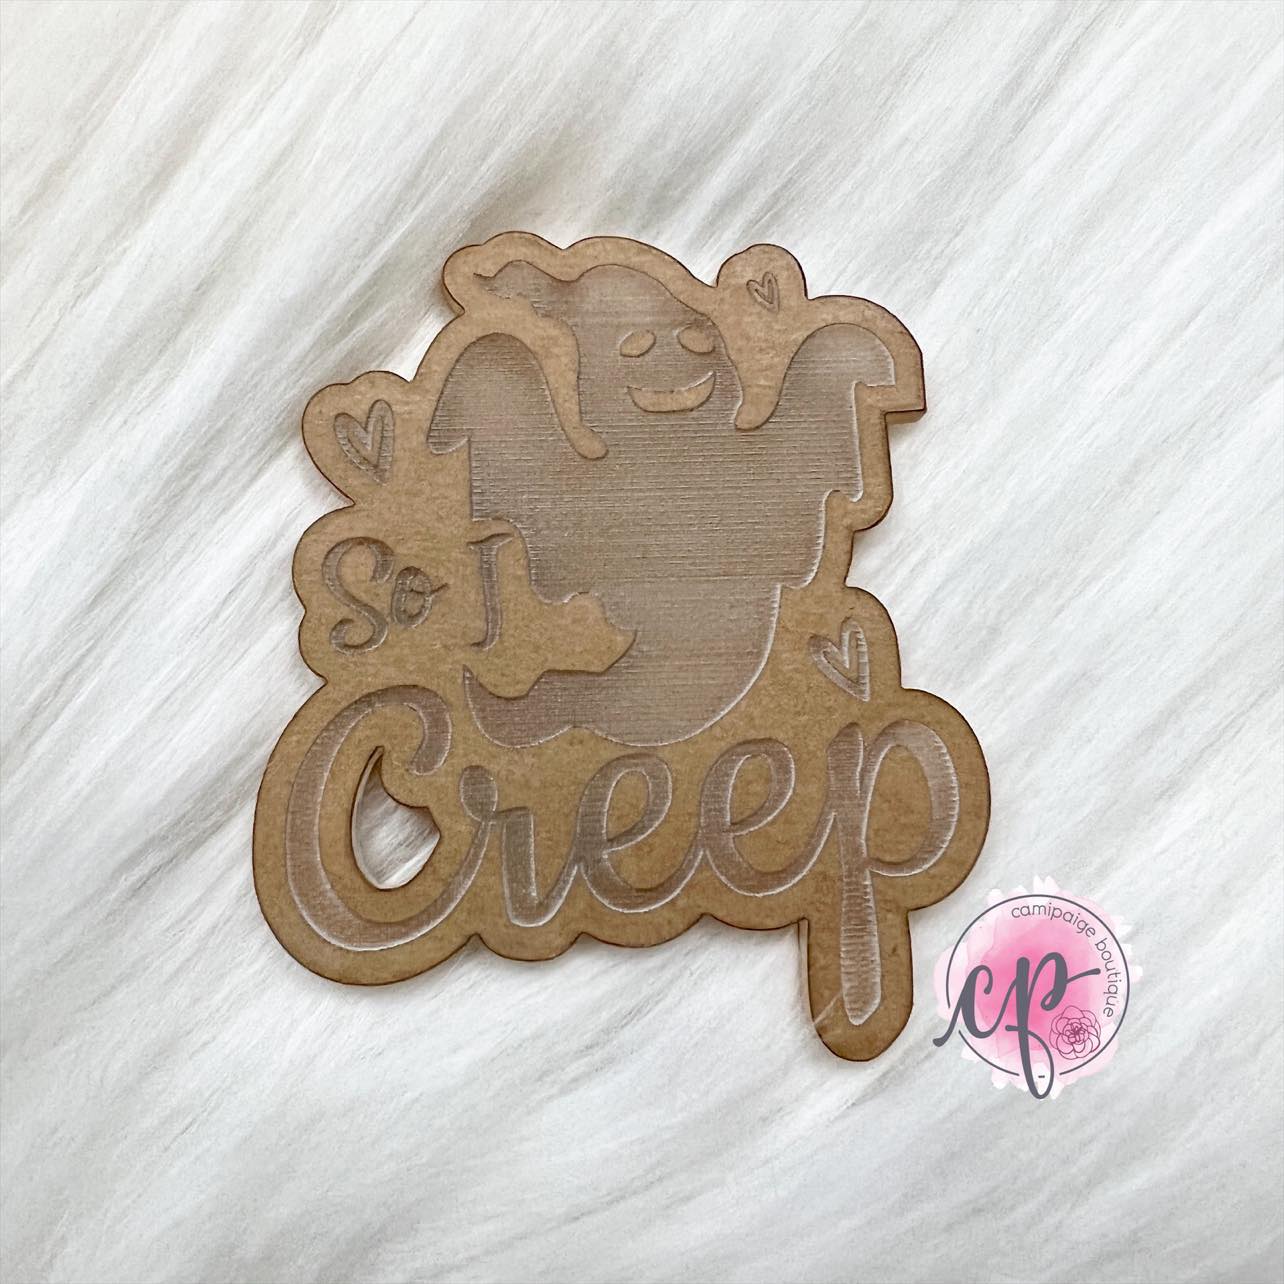 So I Creep Ghost - Laser Engraved Clear Acrylic Blank - CamiPaige Boutique